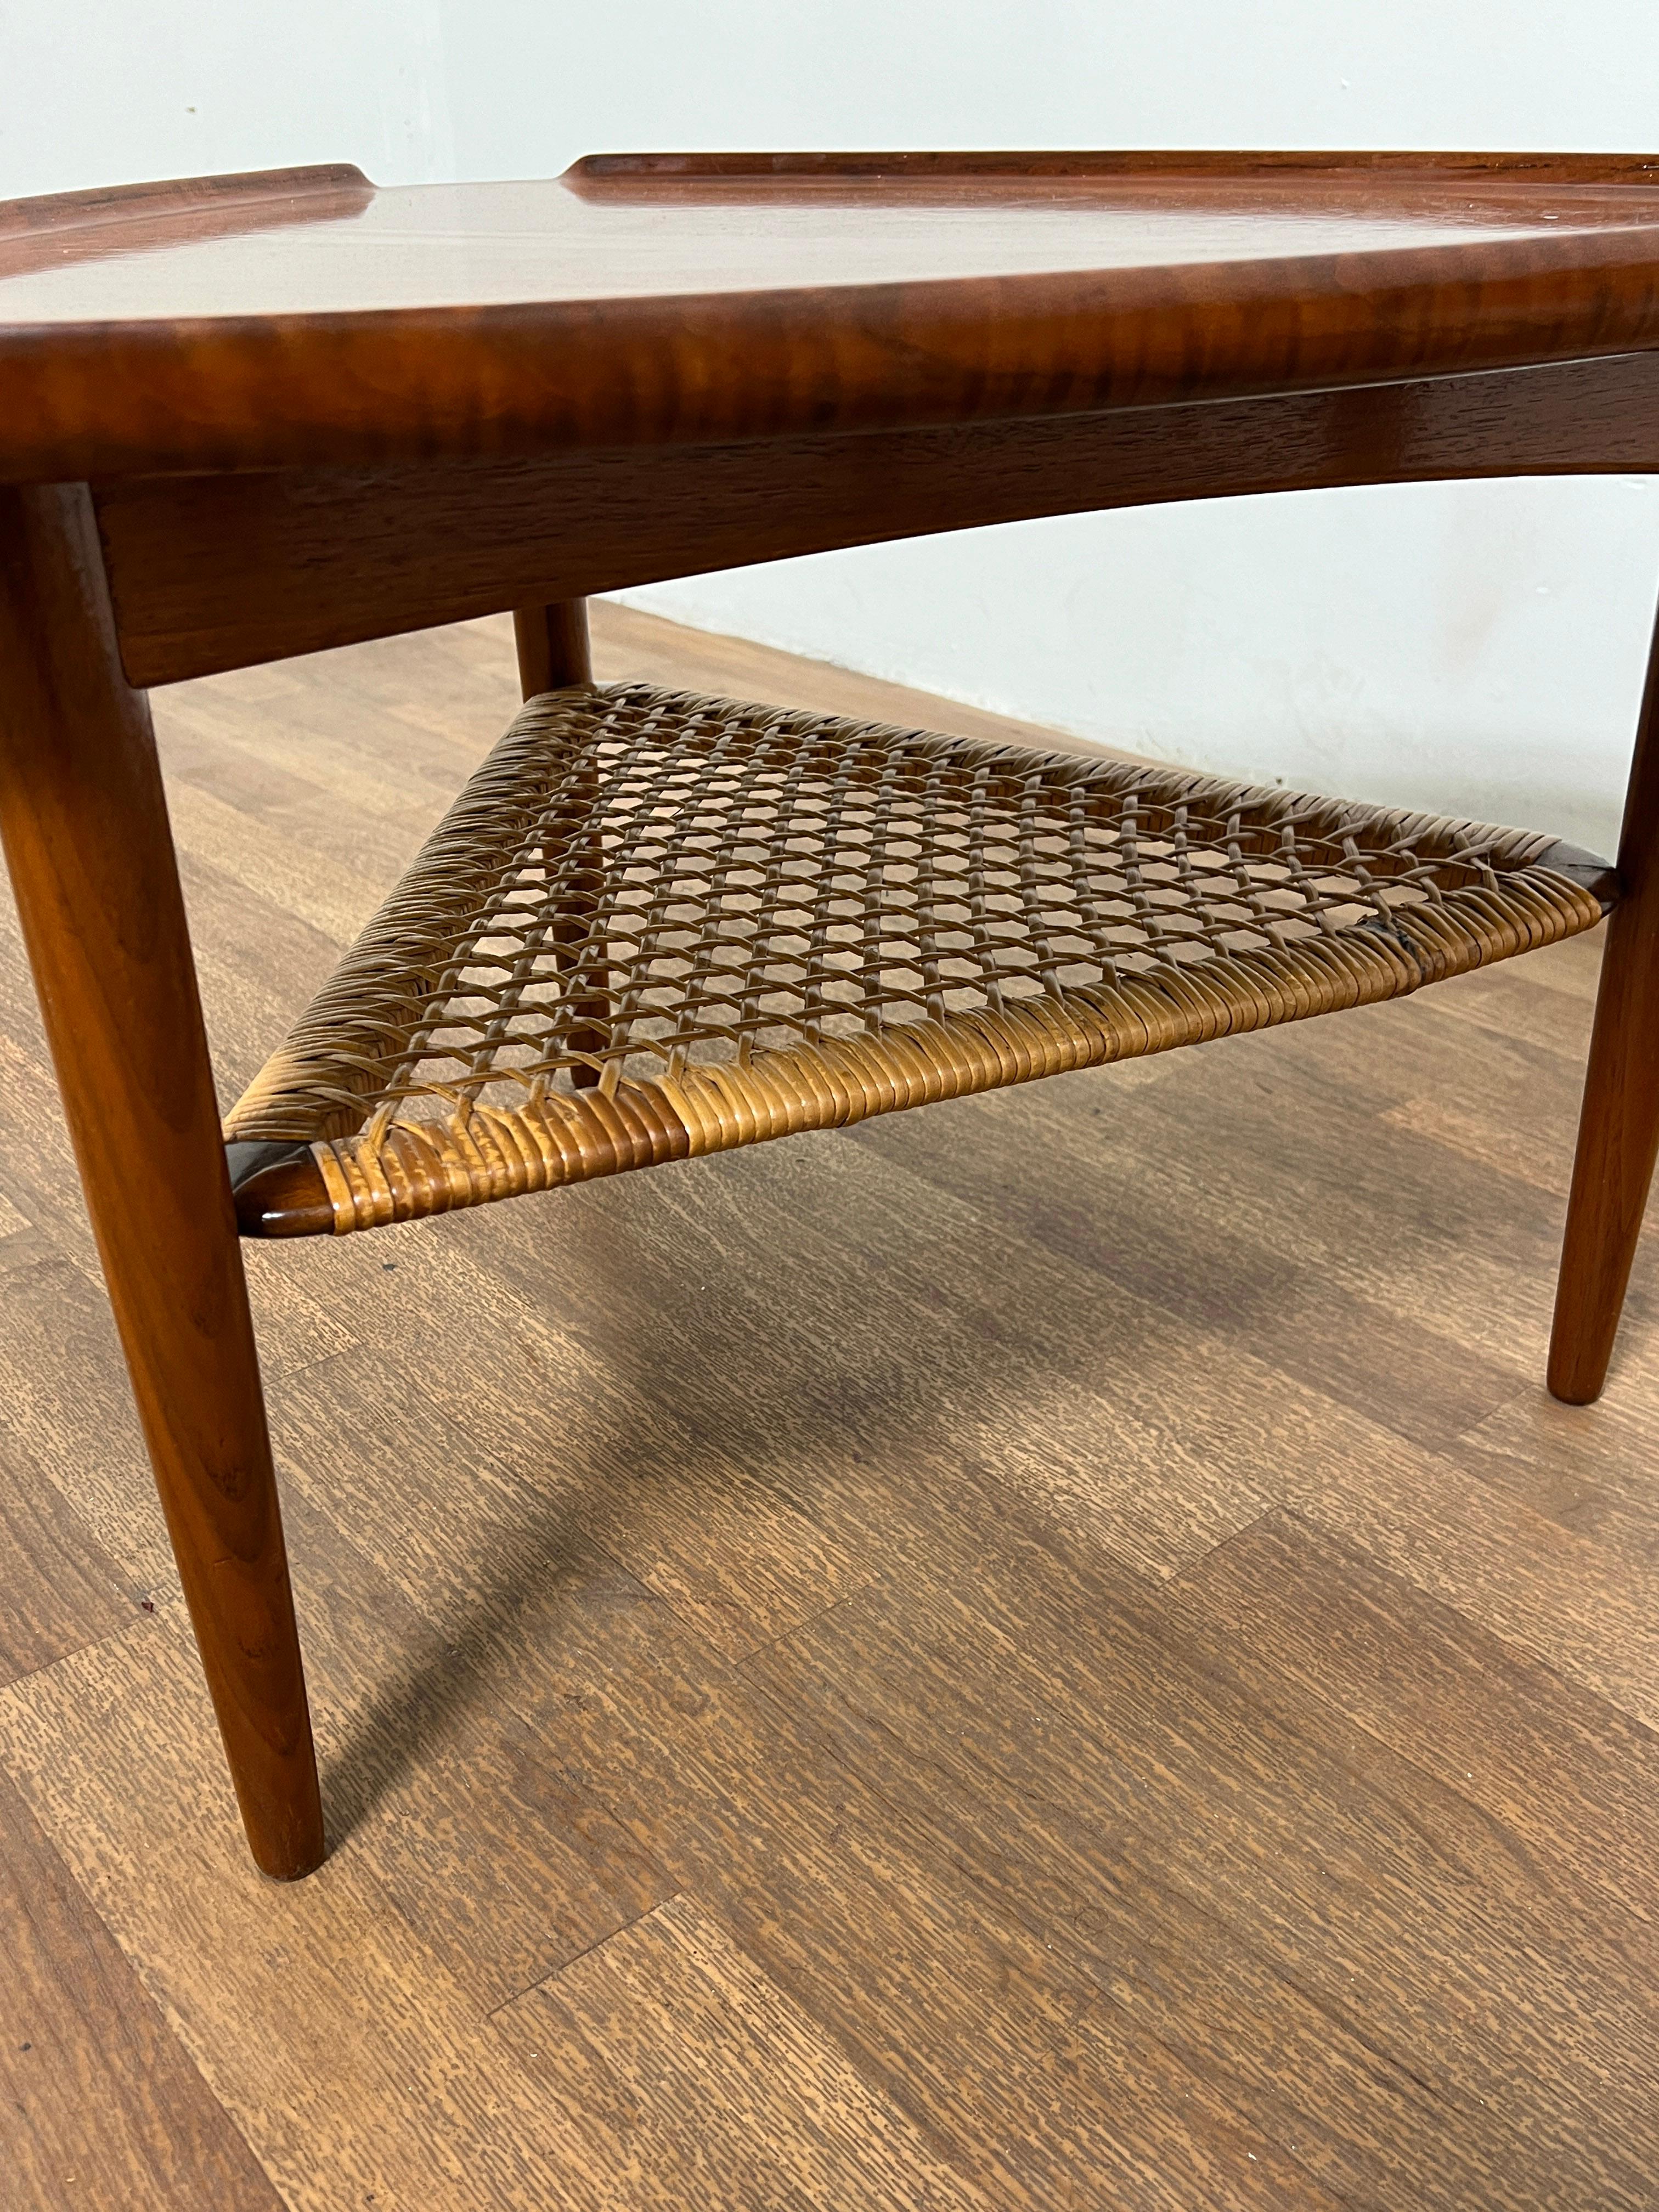 Pair of Poul Jensen for Selig Teak and Cane Tripod Side Tables C. 1960s For Sale 2